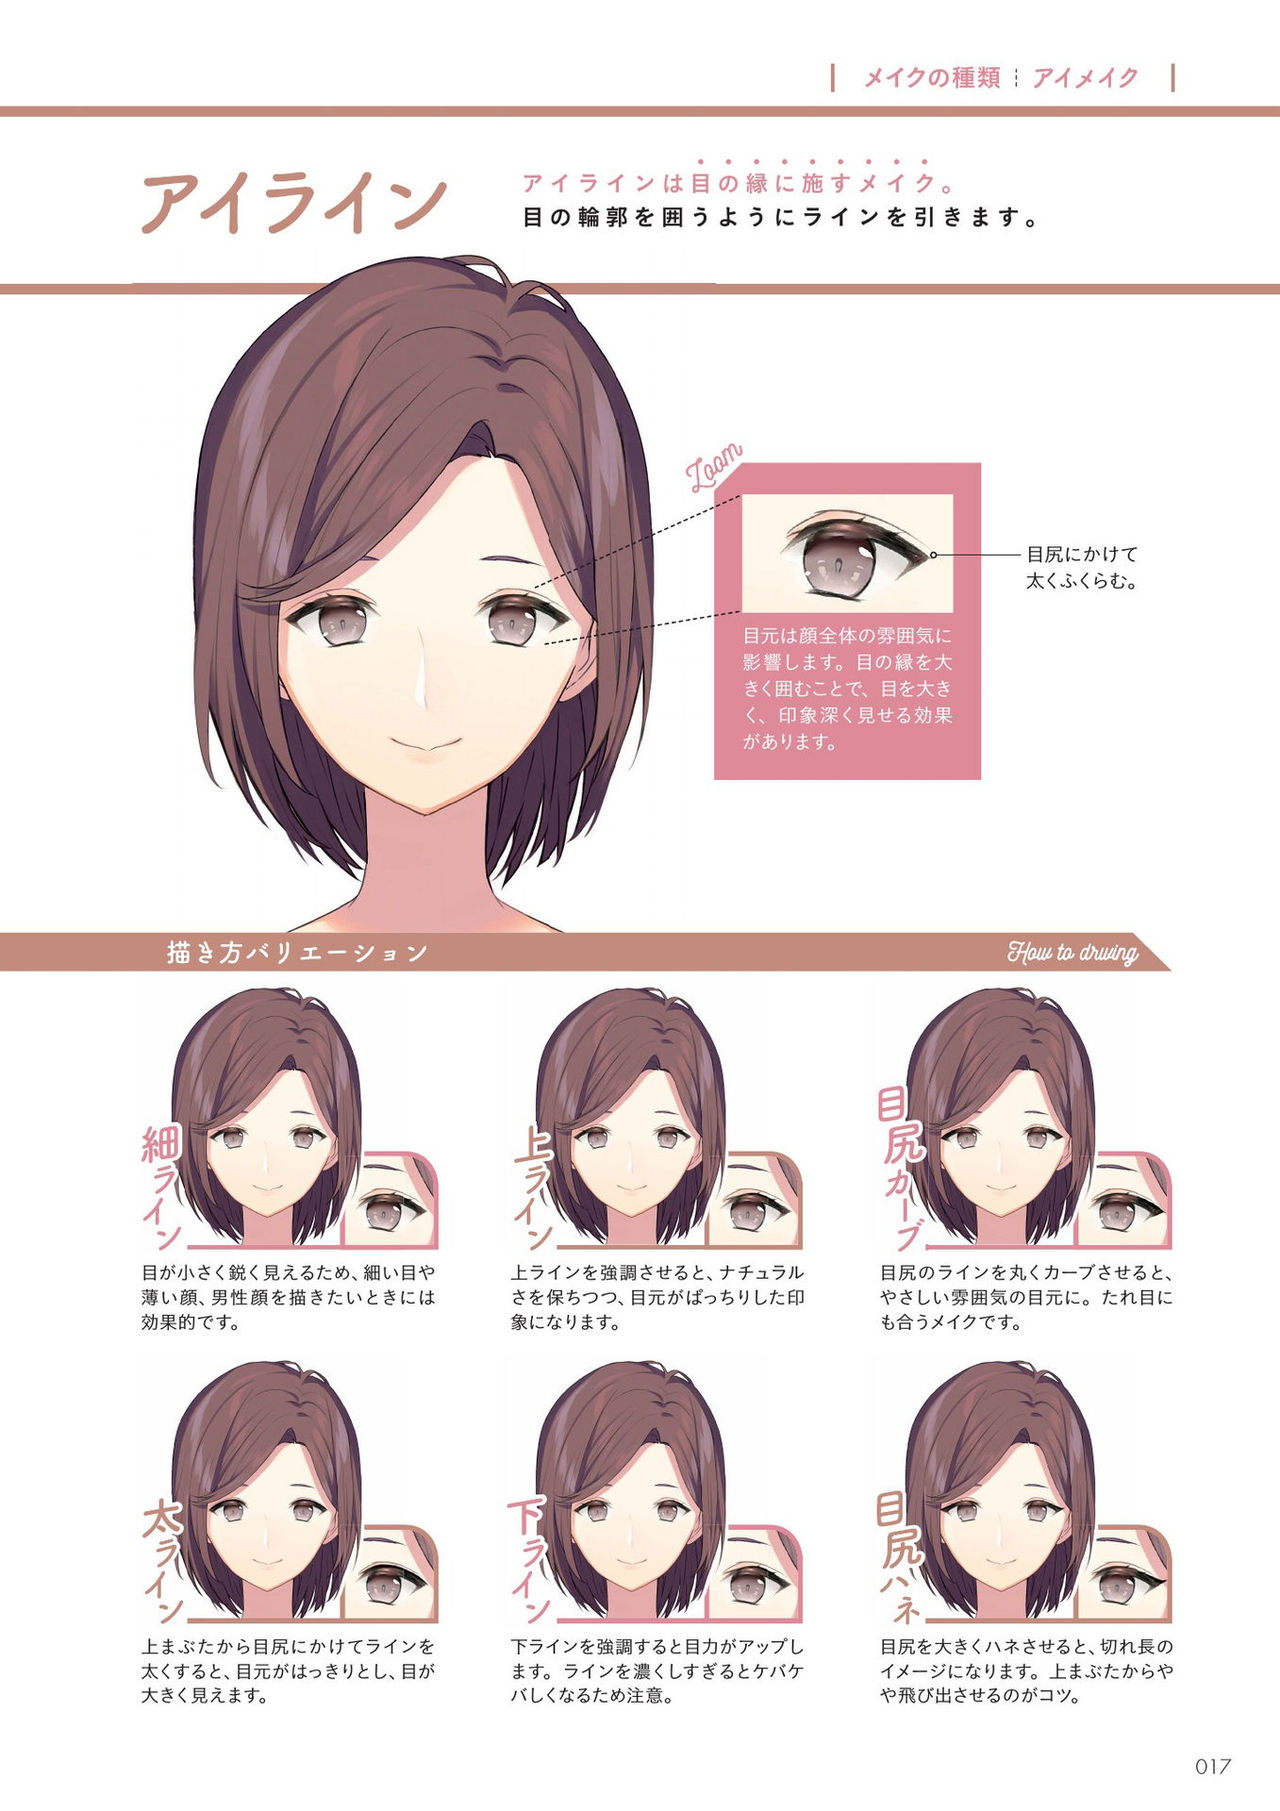 [sogawa]Super drawable series Techniques for drawing female characters with makeup  - 1話(1/4) - 3